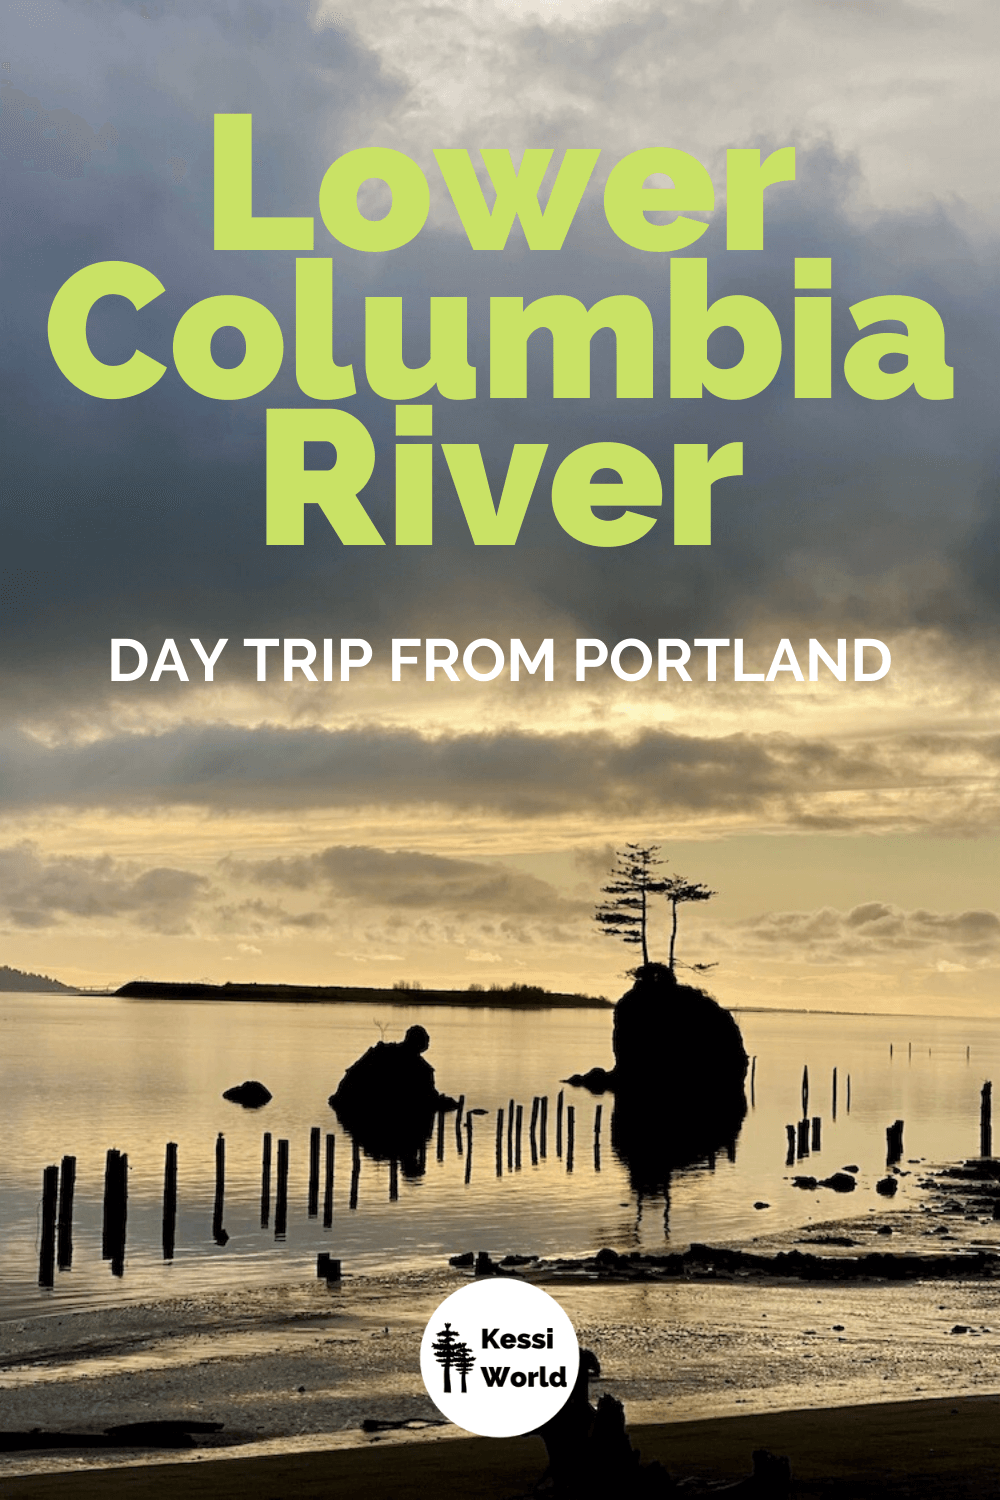 This Pinterest tile shows stacks of rocks rise up from the lower Columbia River at sunset, revealing shadows of old wood pilings, a low tide Bach and dramatic gray clouds with a peek of blue sky shining through.